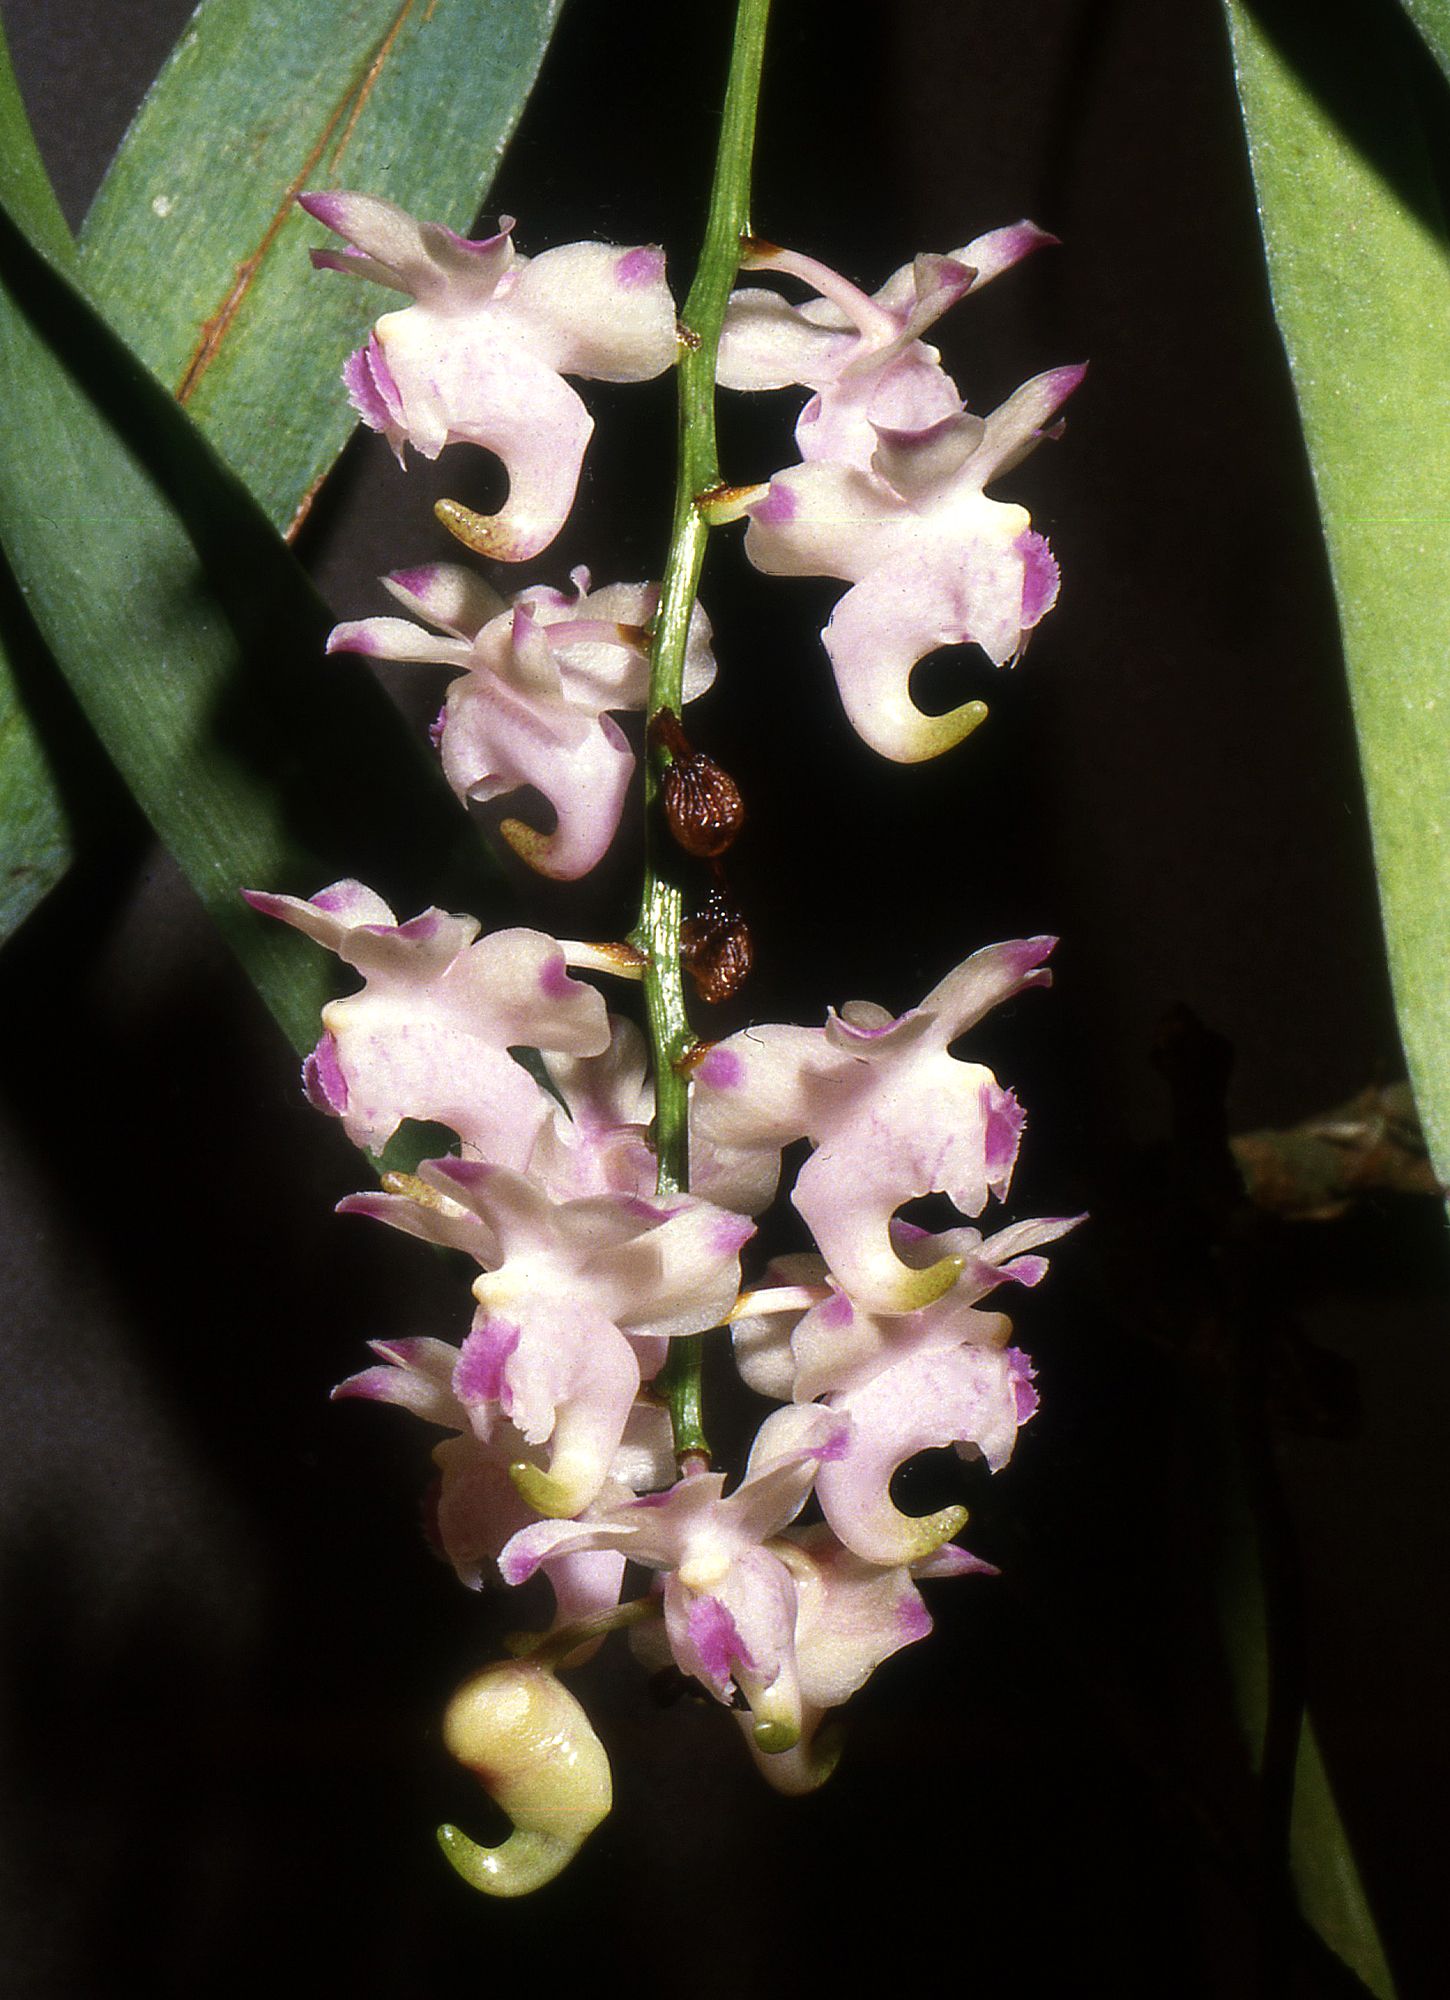 http://upload.wikimedia.org/wikipedia/commons/5/5e/Aerides_lawrenceae_Orchi_002.jpg